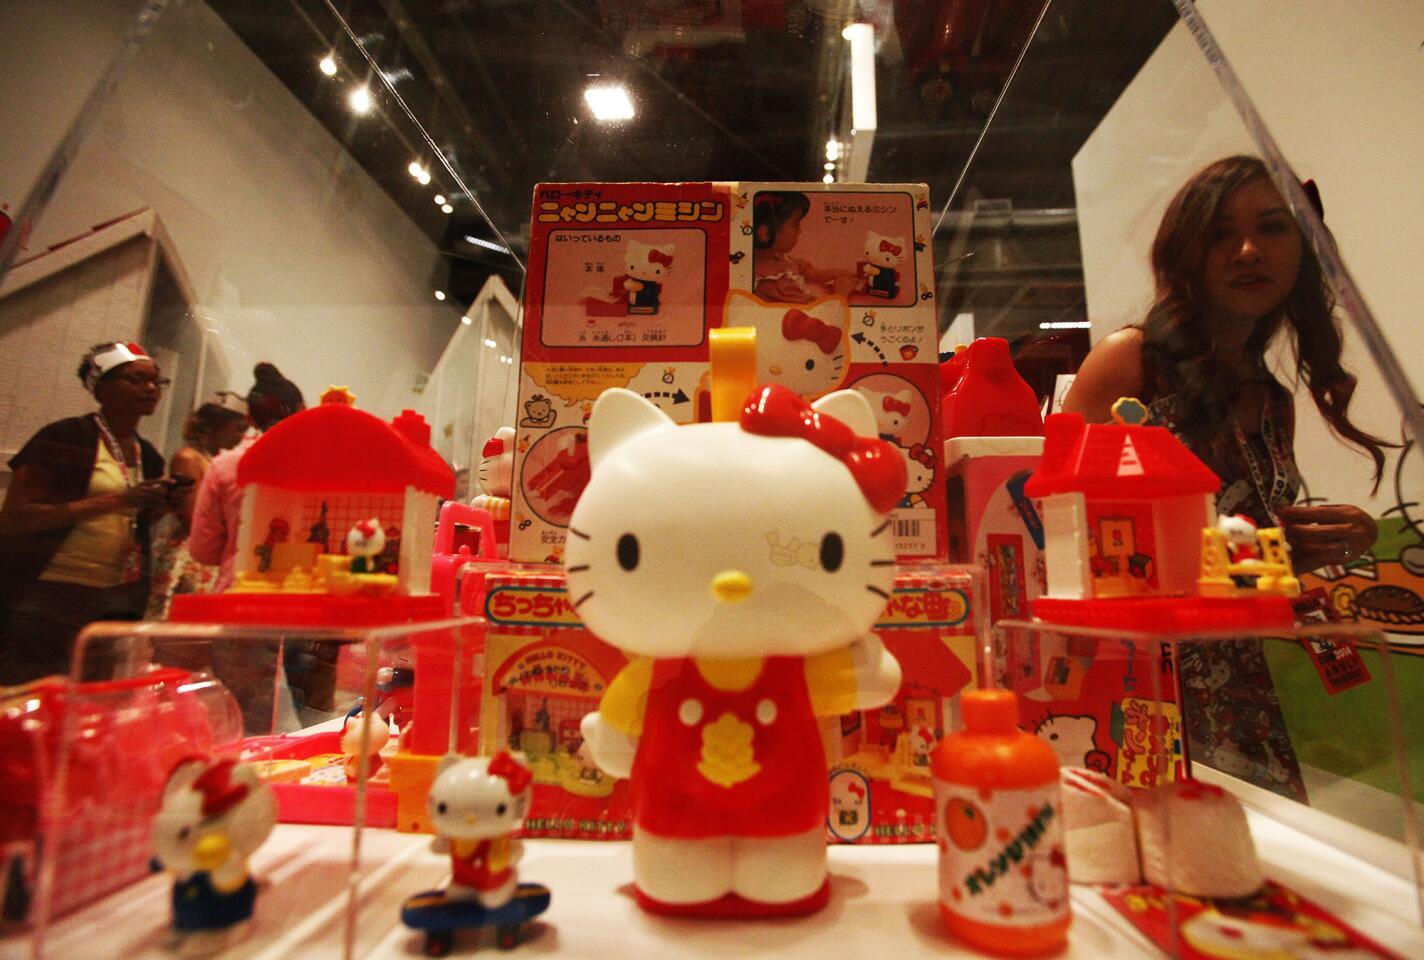 Visitors photograph and observe one of many displays at the Hello Kitty Con 2014 at The Geffen Contemporary at MOCA in Los Angeles.